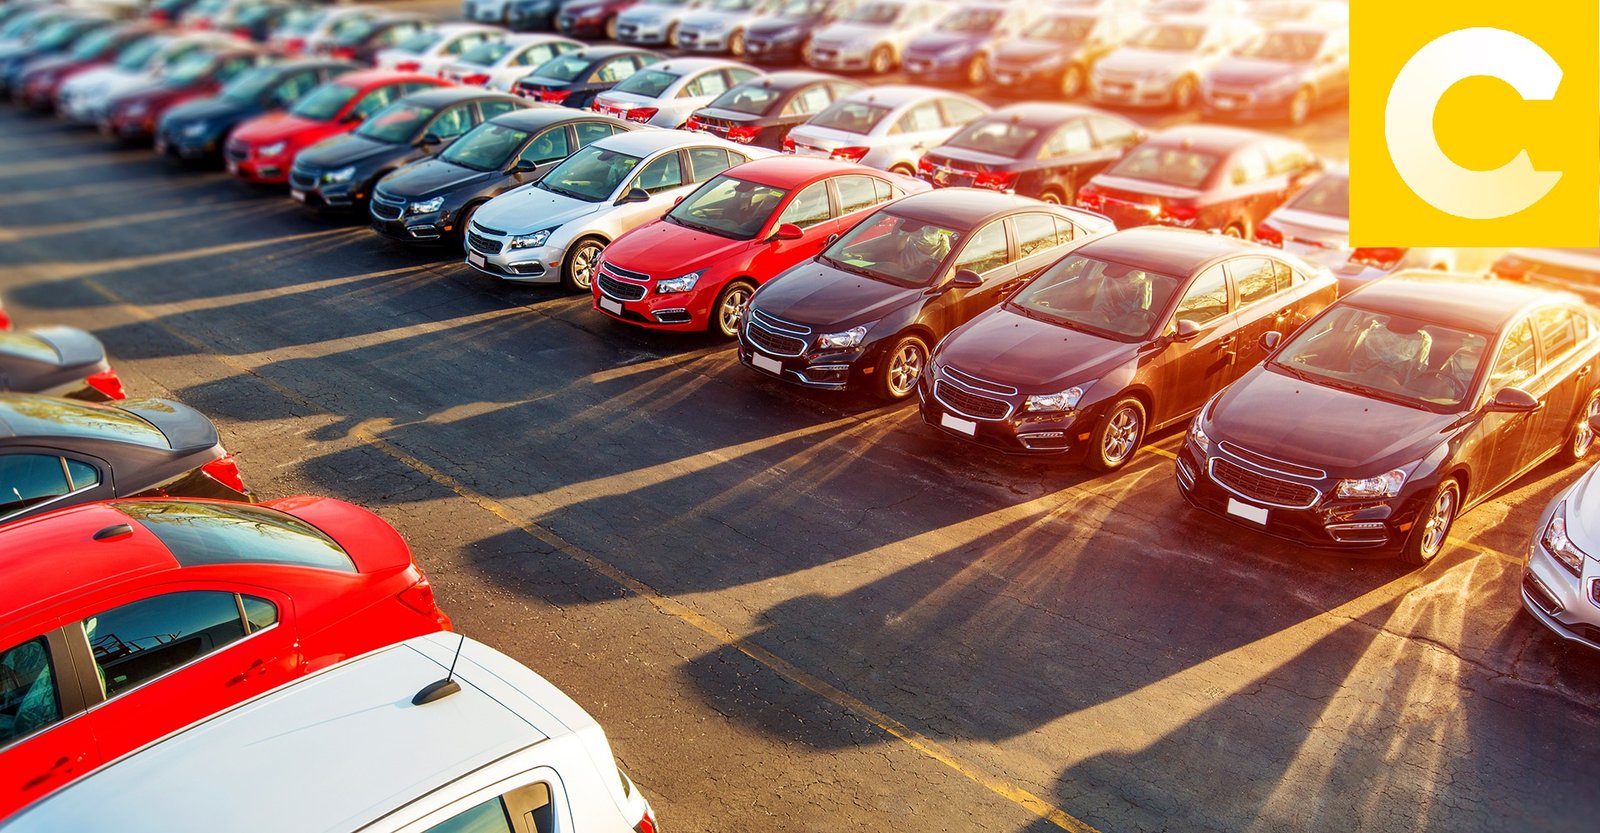 Are Car Yards Open on Sunday? A Weekend Shopping Guide